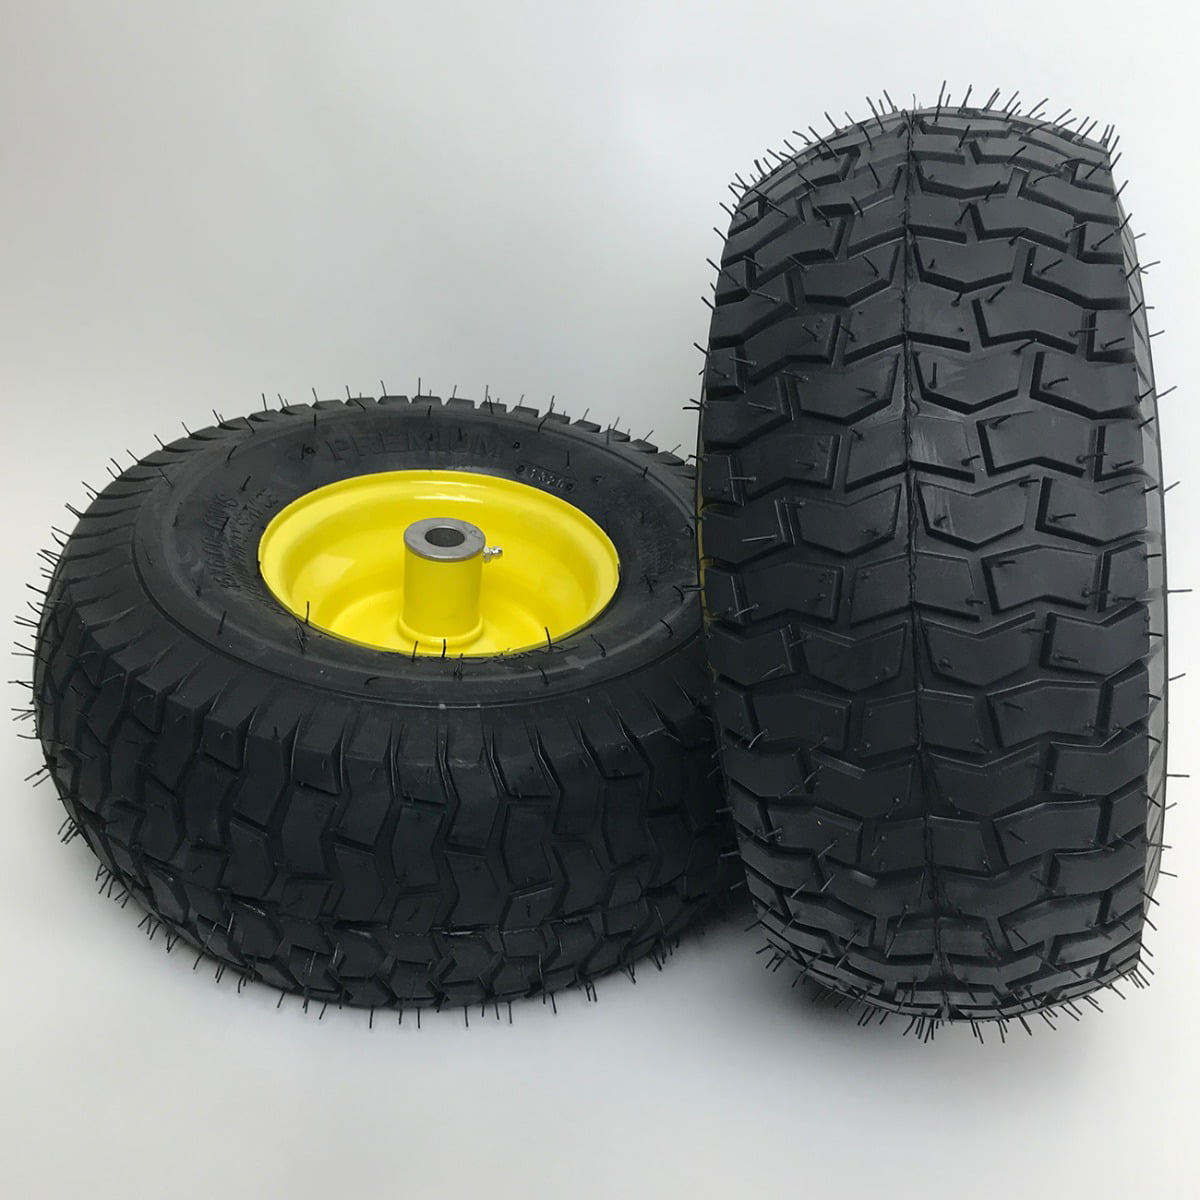 Set of 2 - 15x6.00-6 Lawn Mower Tire and Rim - Fits on 3/4 Inch Axle